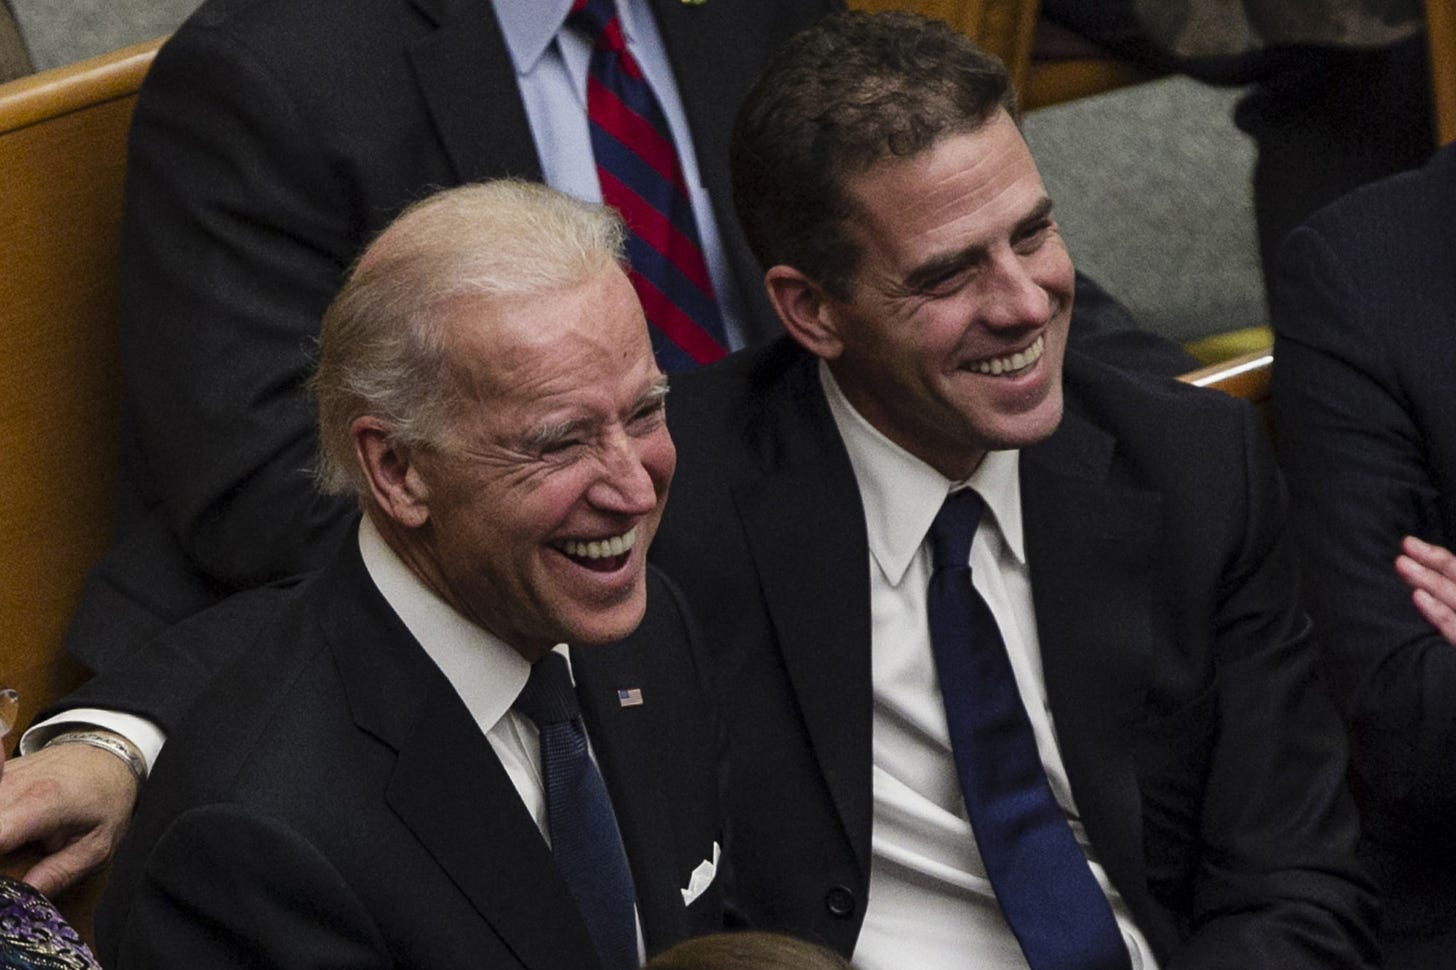 Media disgraceful trying to suppress Post's Hunter Biden reporting